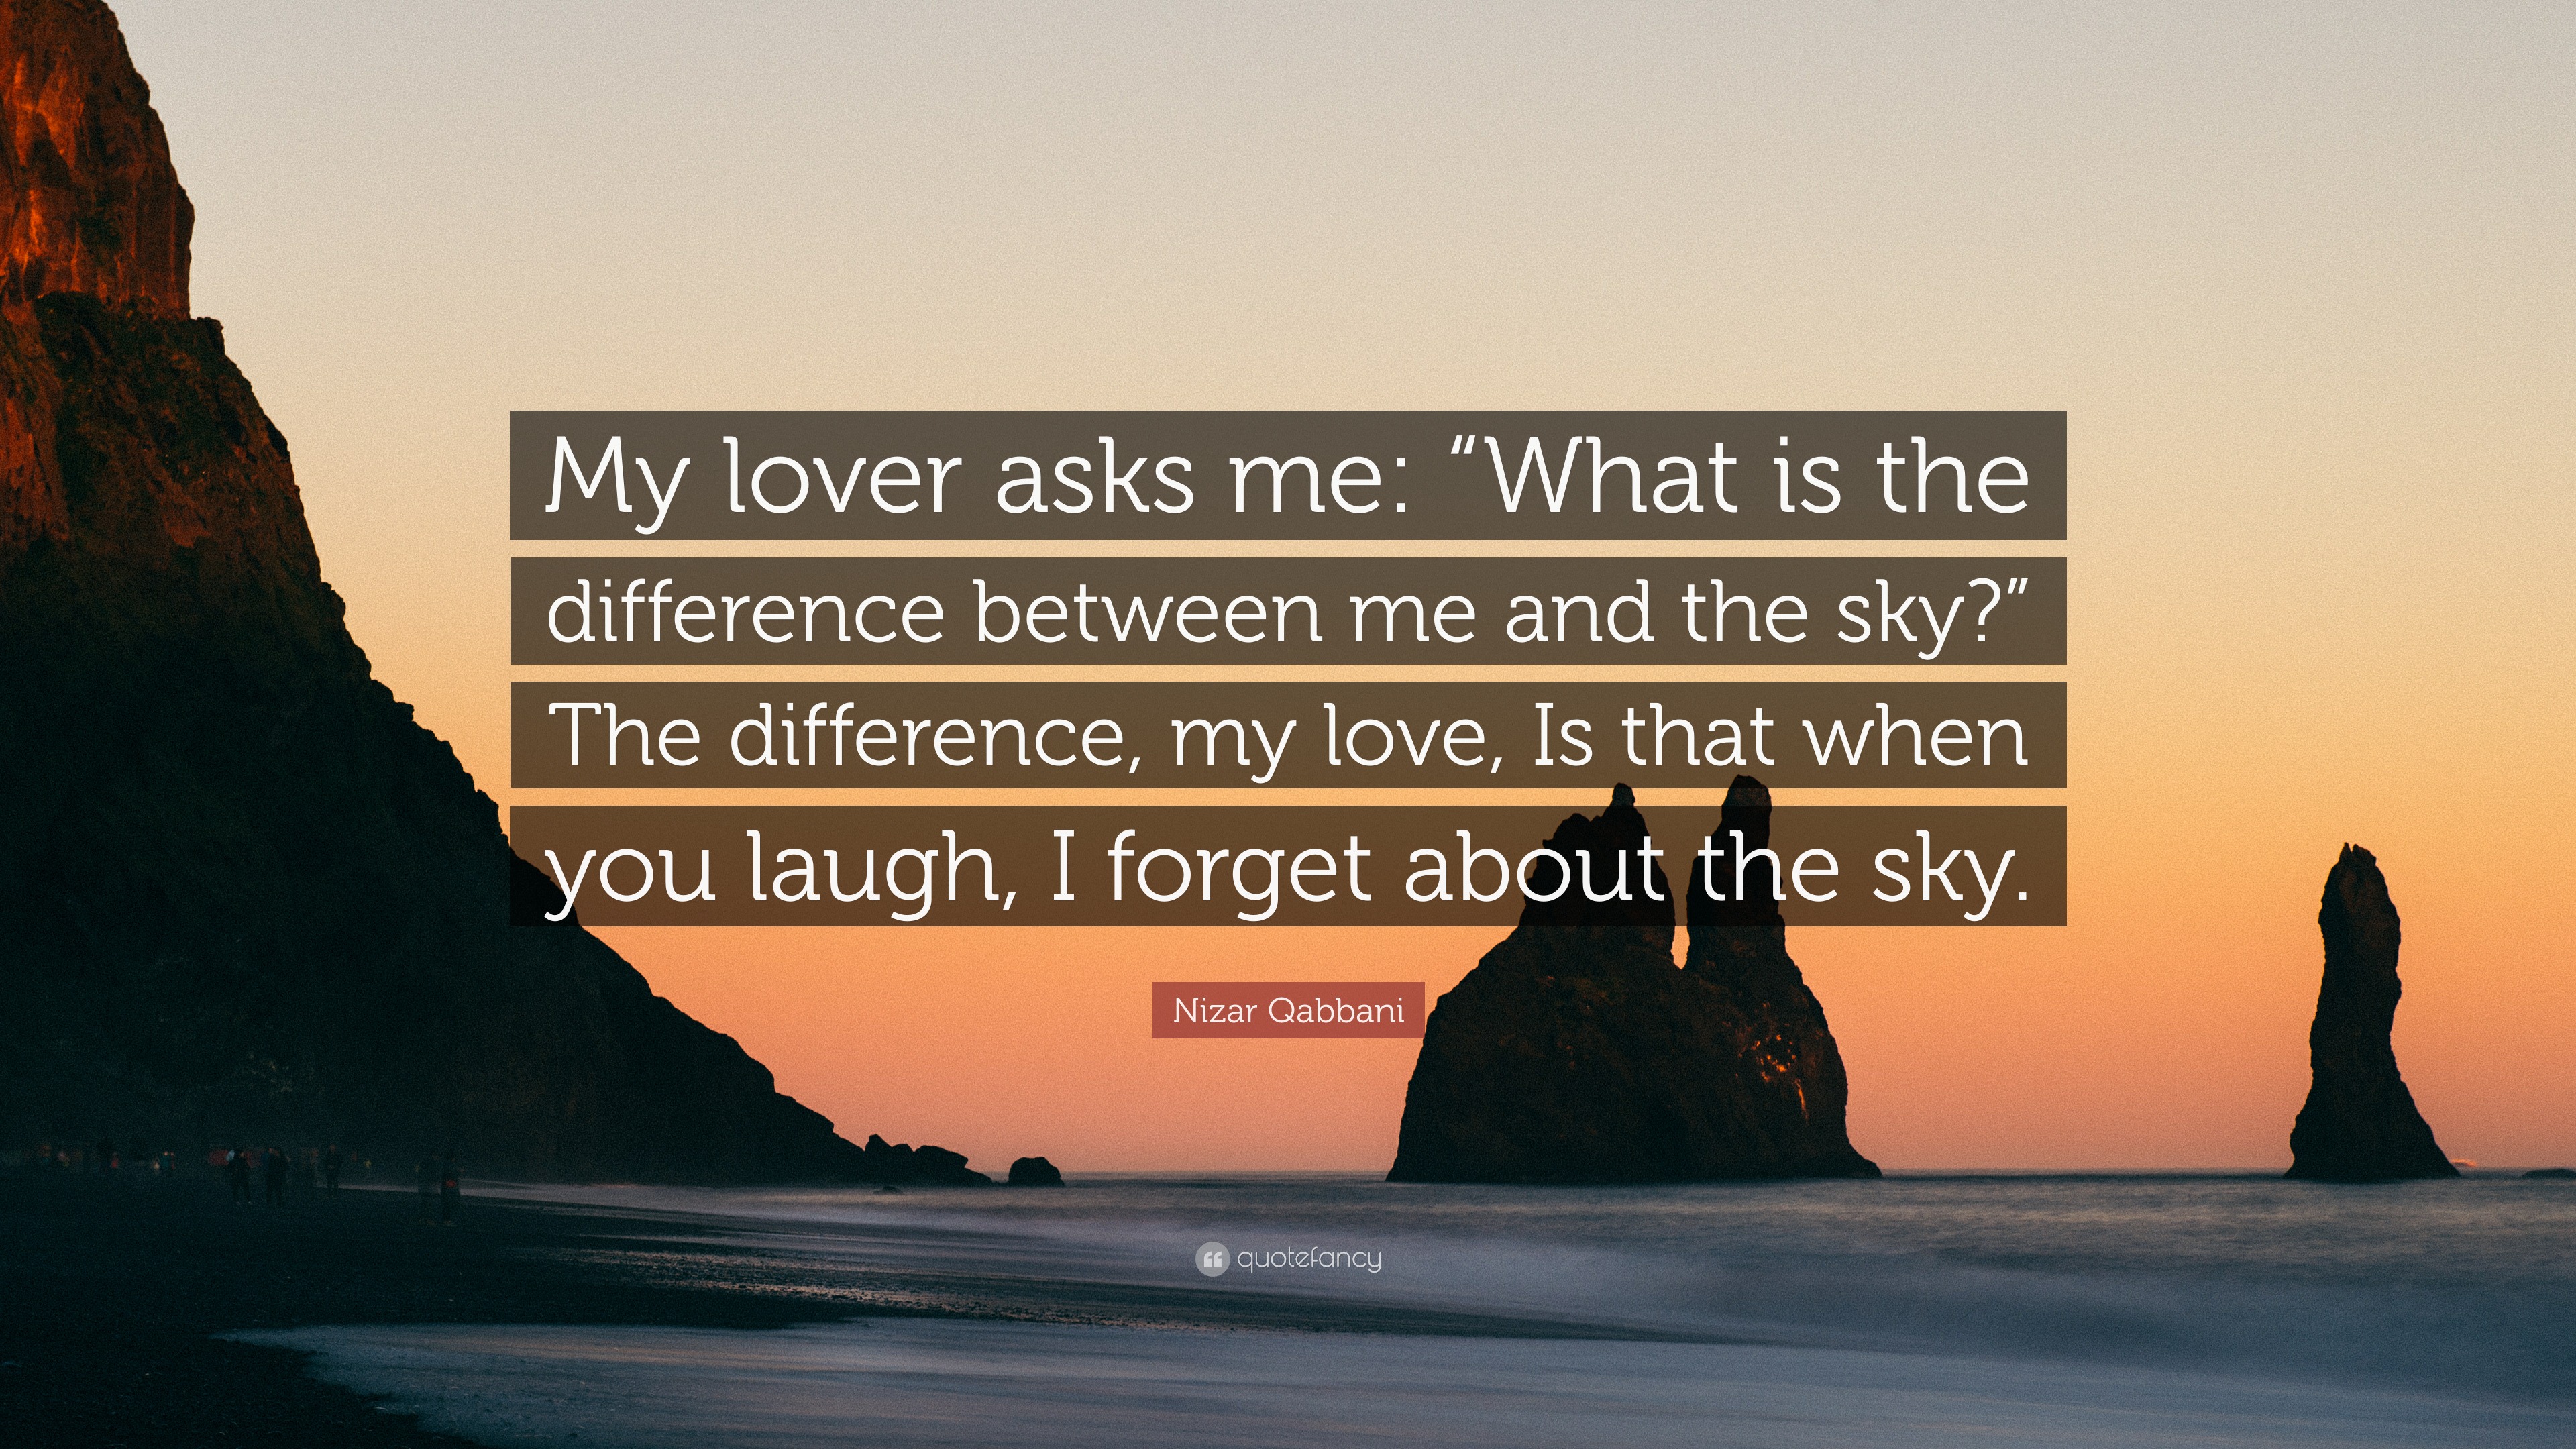 Nizar Qabbani Quote: “My lover asks me: “What is the difference between me  and the sky?” The difference, my love, Is that when you laugh, I fo”